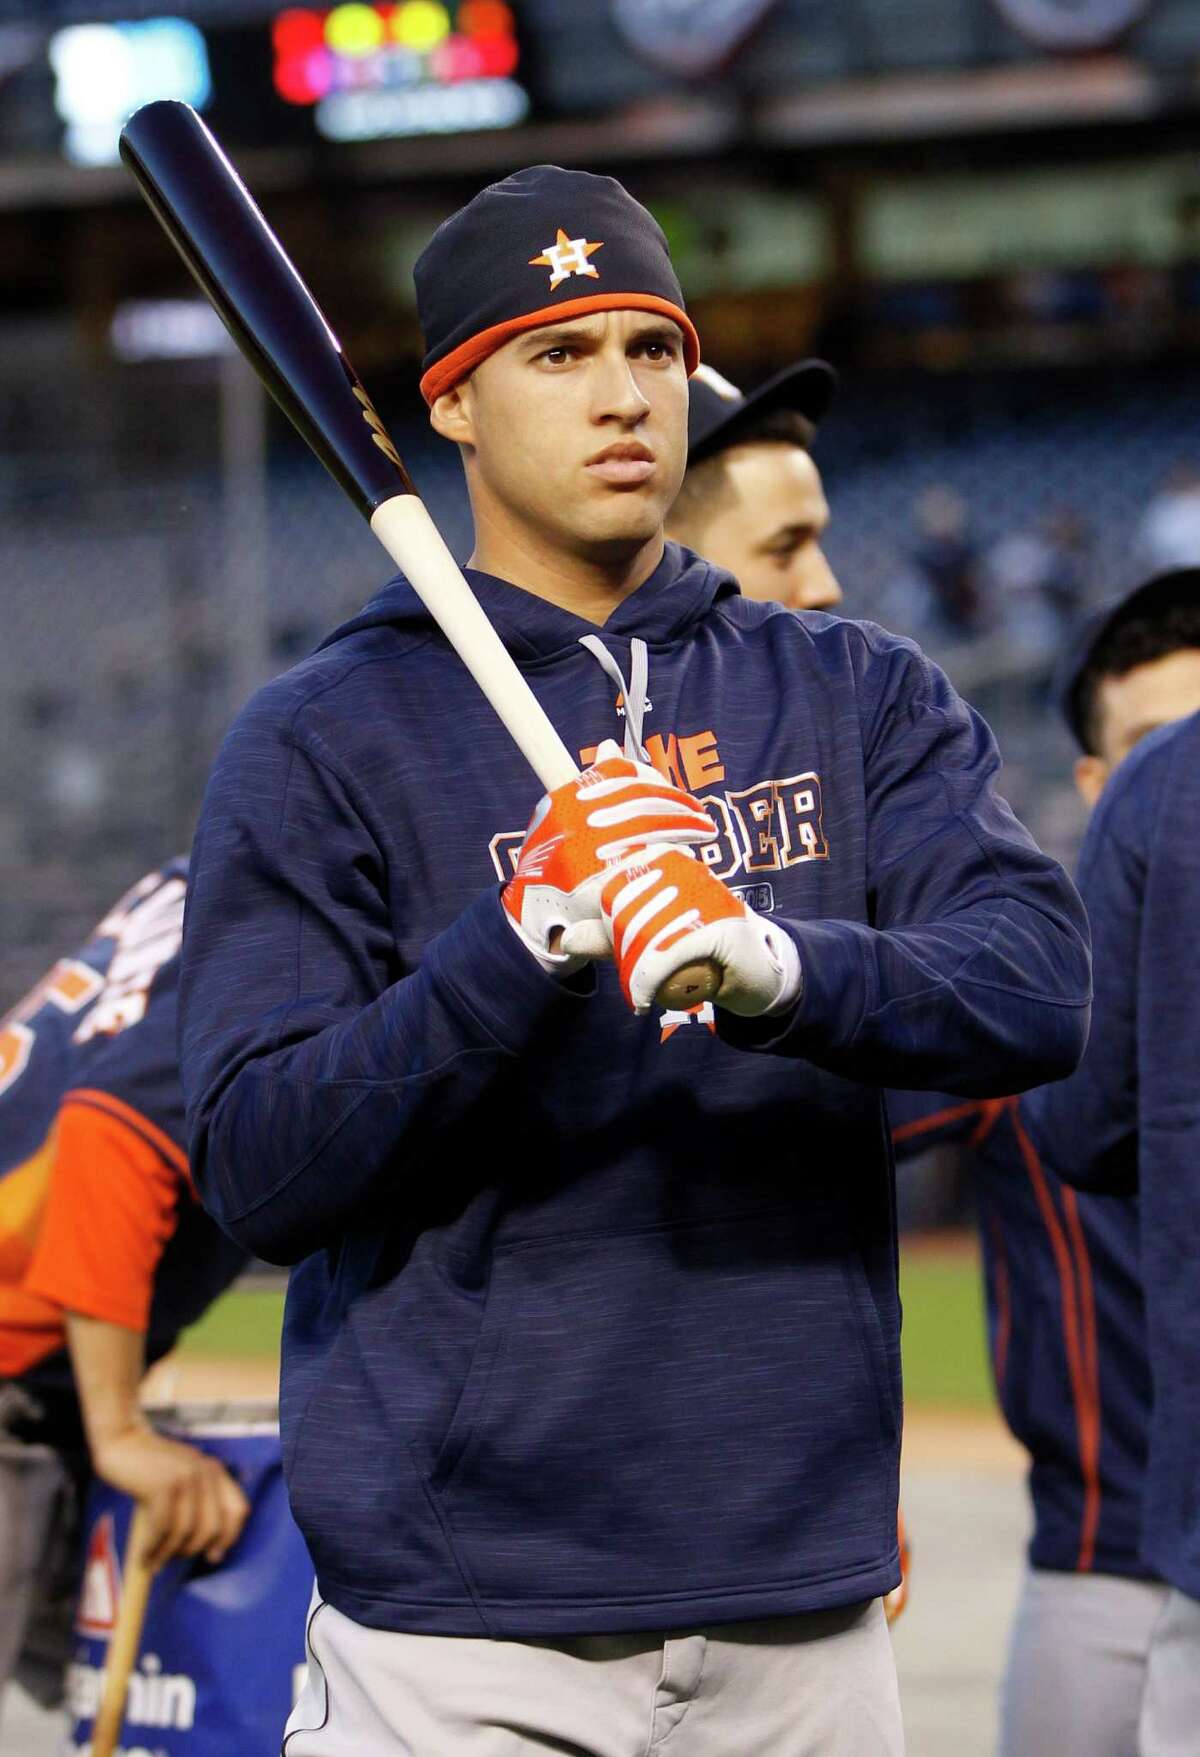 George Springer during batting practice before the start of the American League Wild Card game at Yankee Stadium on Tuesday, Oct. 6, 2015, in New York. ( Karen Warren / Houston Chronicle )